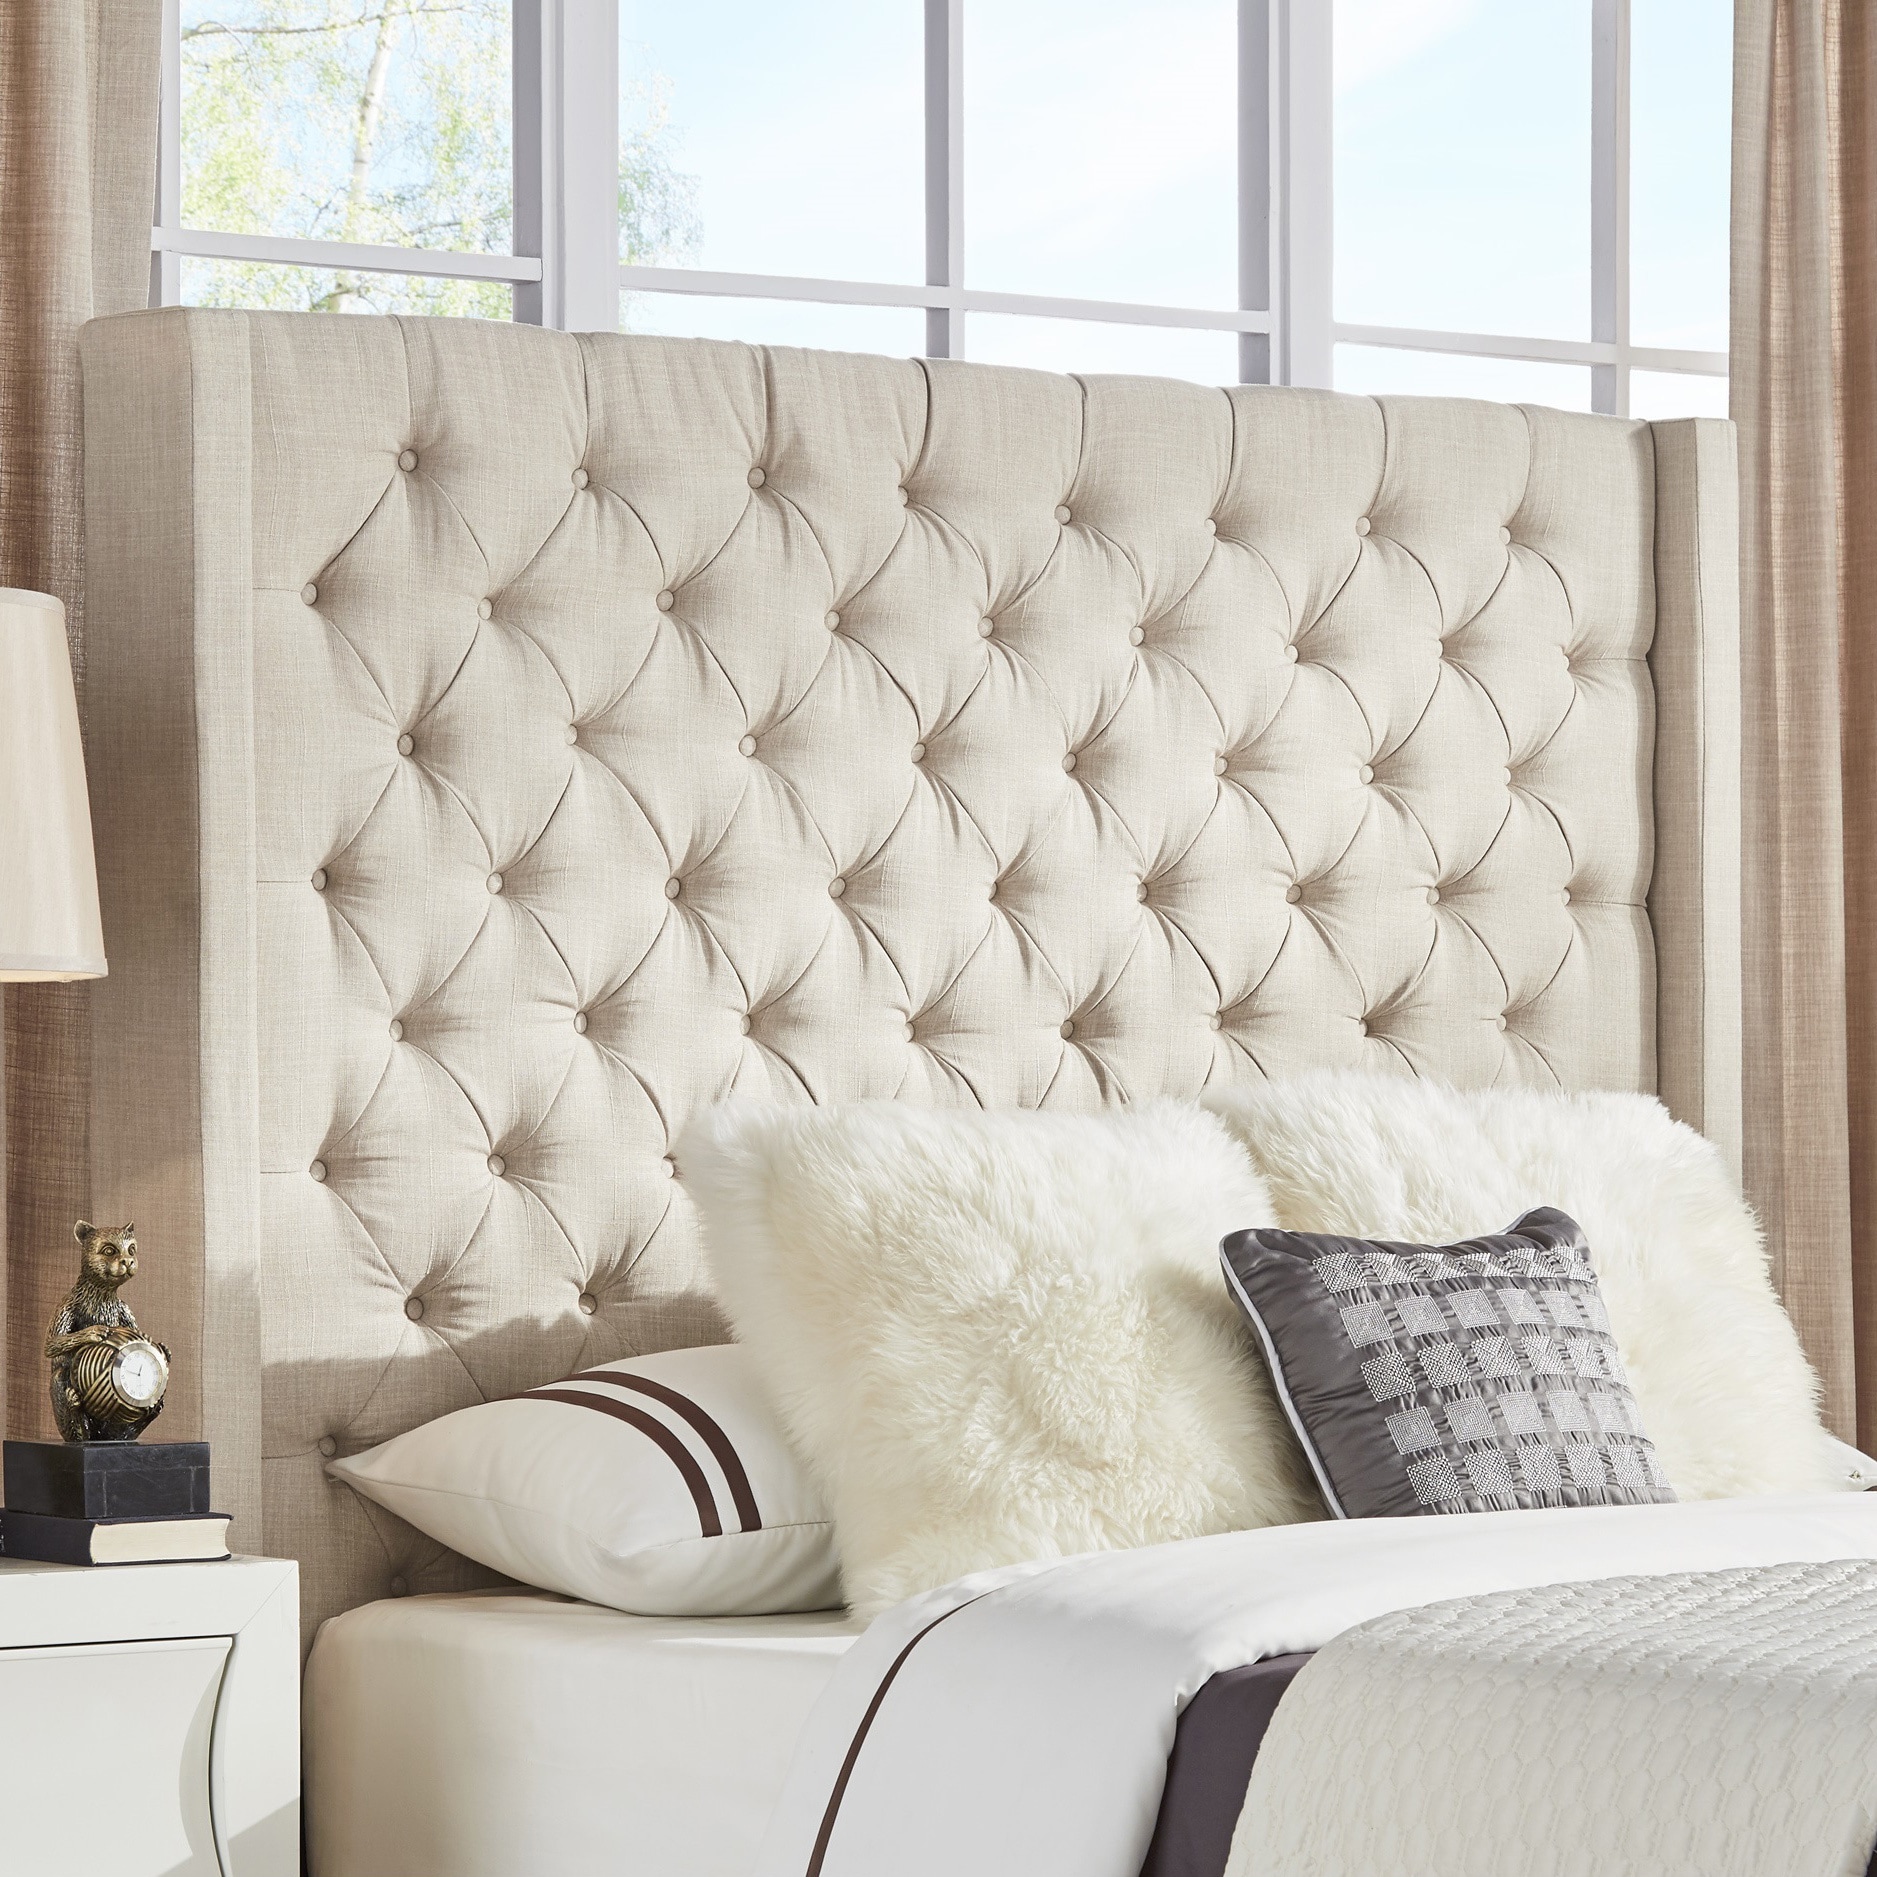 Naples Wingback Button Tufted Tall Headboards By Inspire Q Artisan On Sale Overstock 19511535